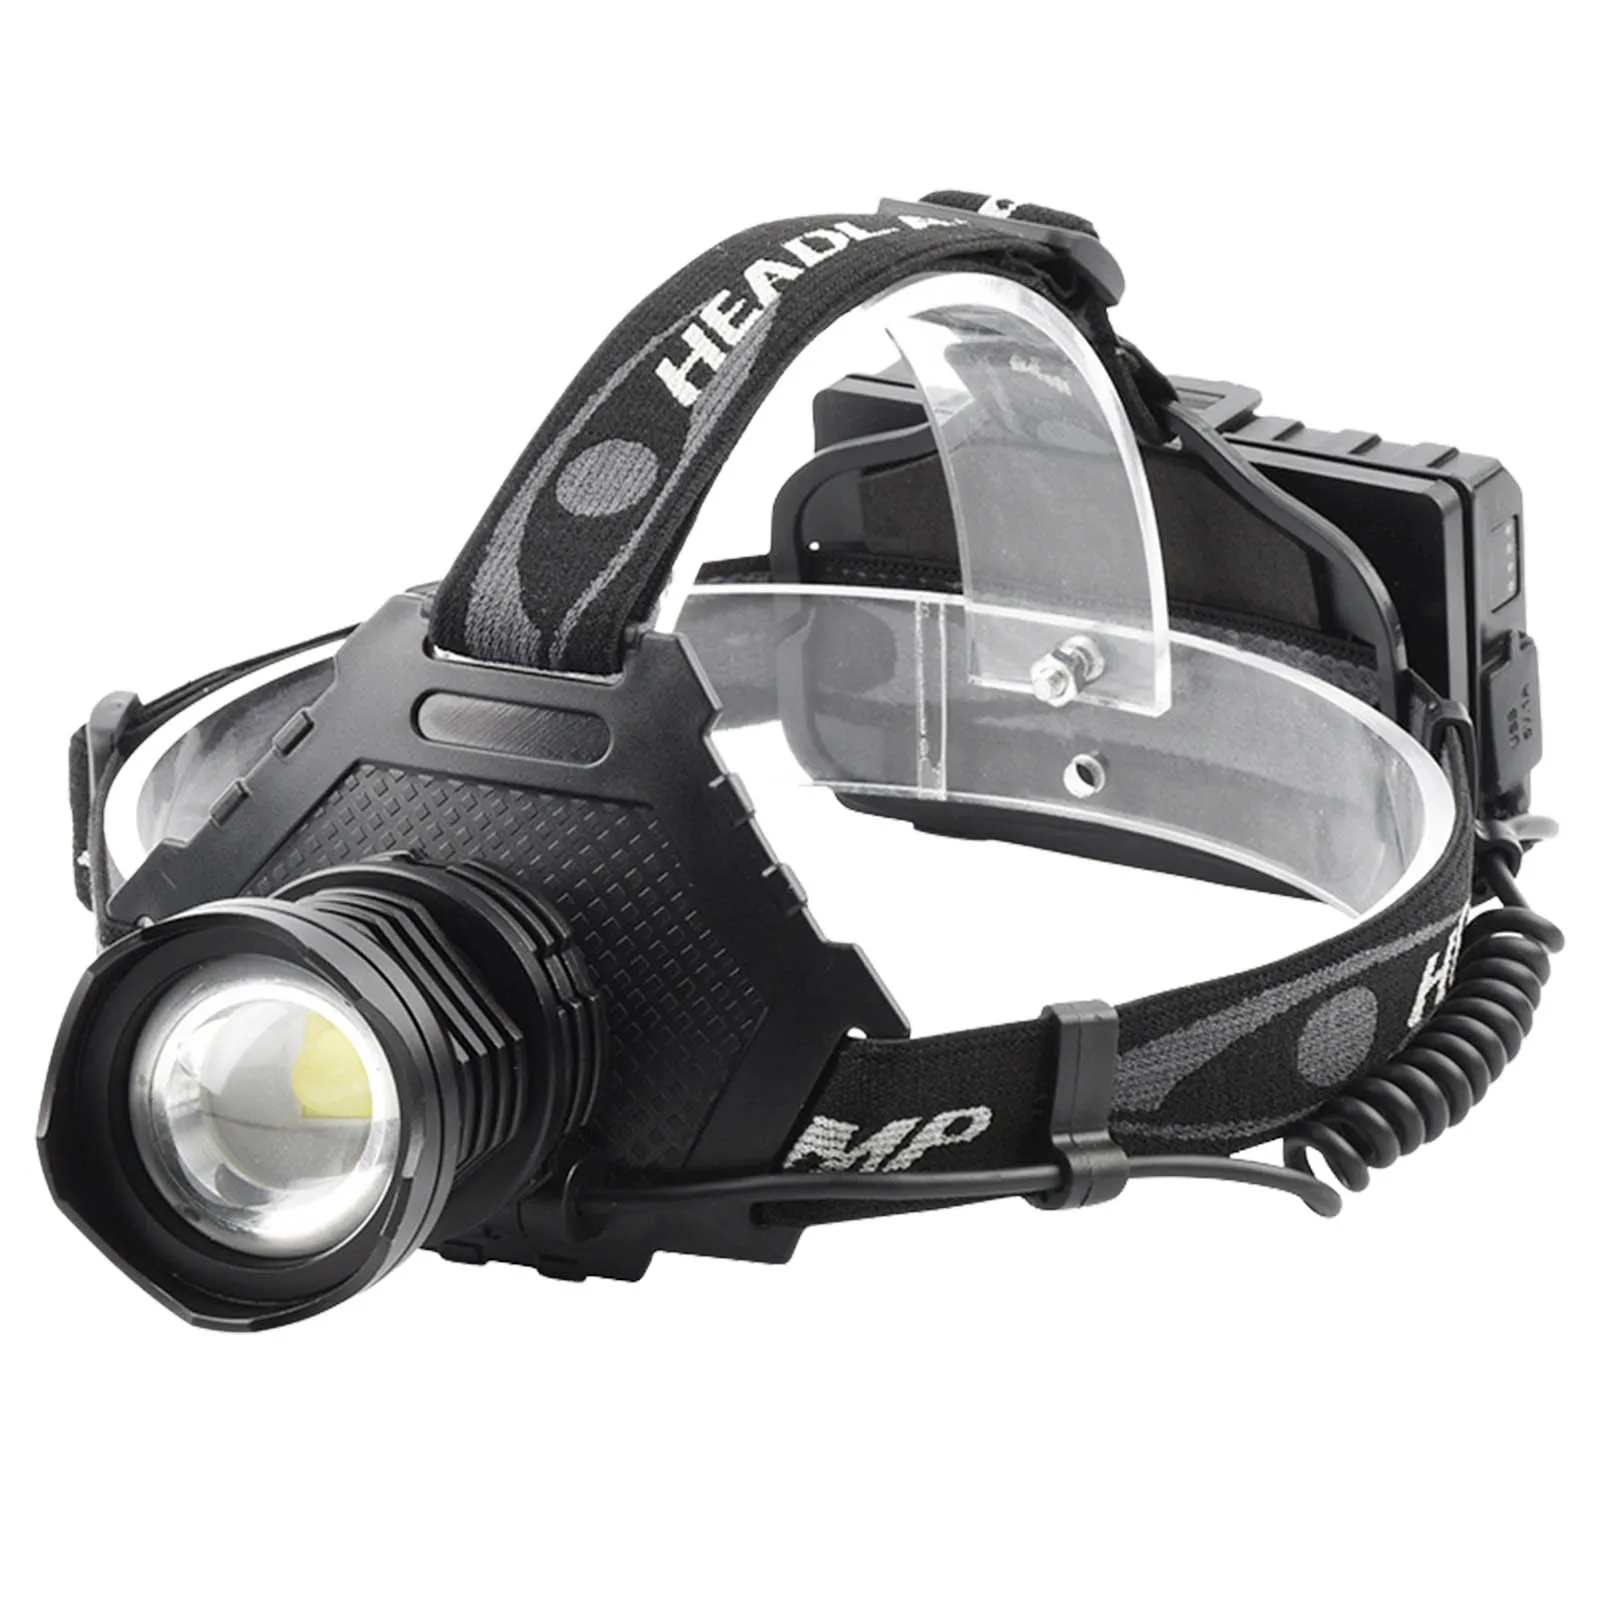 

Head Torch 2000 Lumens High-Power Super Bright Headlight P70 LED Headlamp With 5 Light Modes USB Rechargeable IPX4 Waterproof